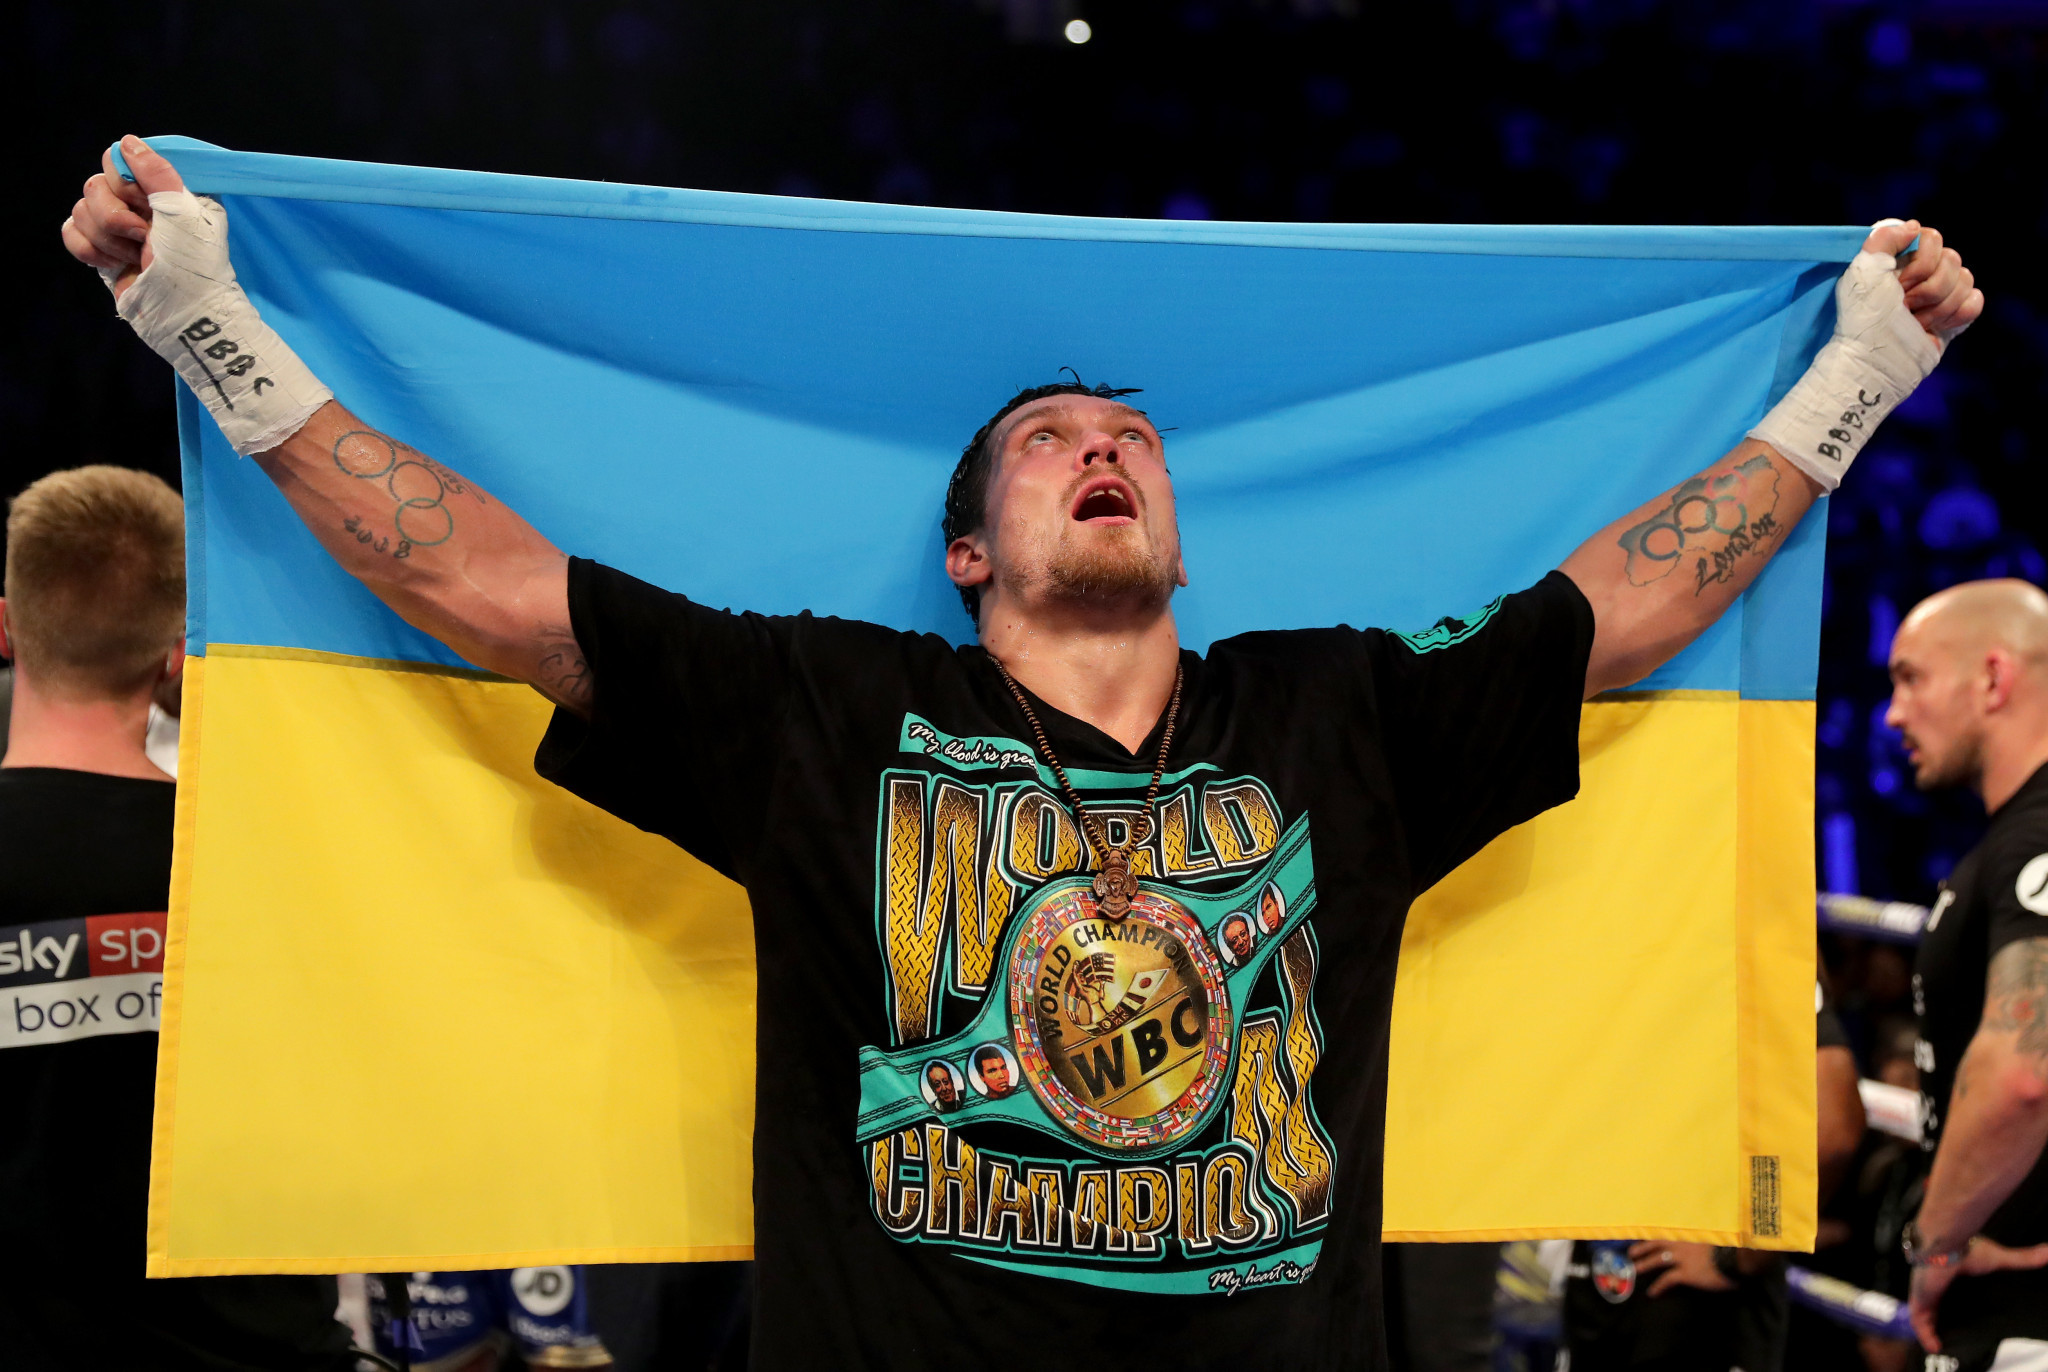 Olympic boxing champion Usyk launching NFT collection to support Ukraine